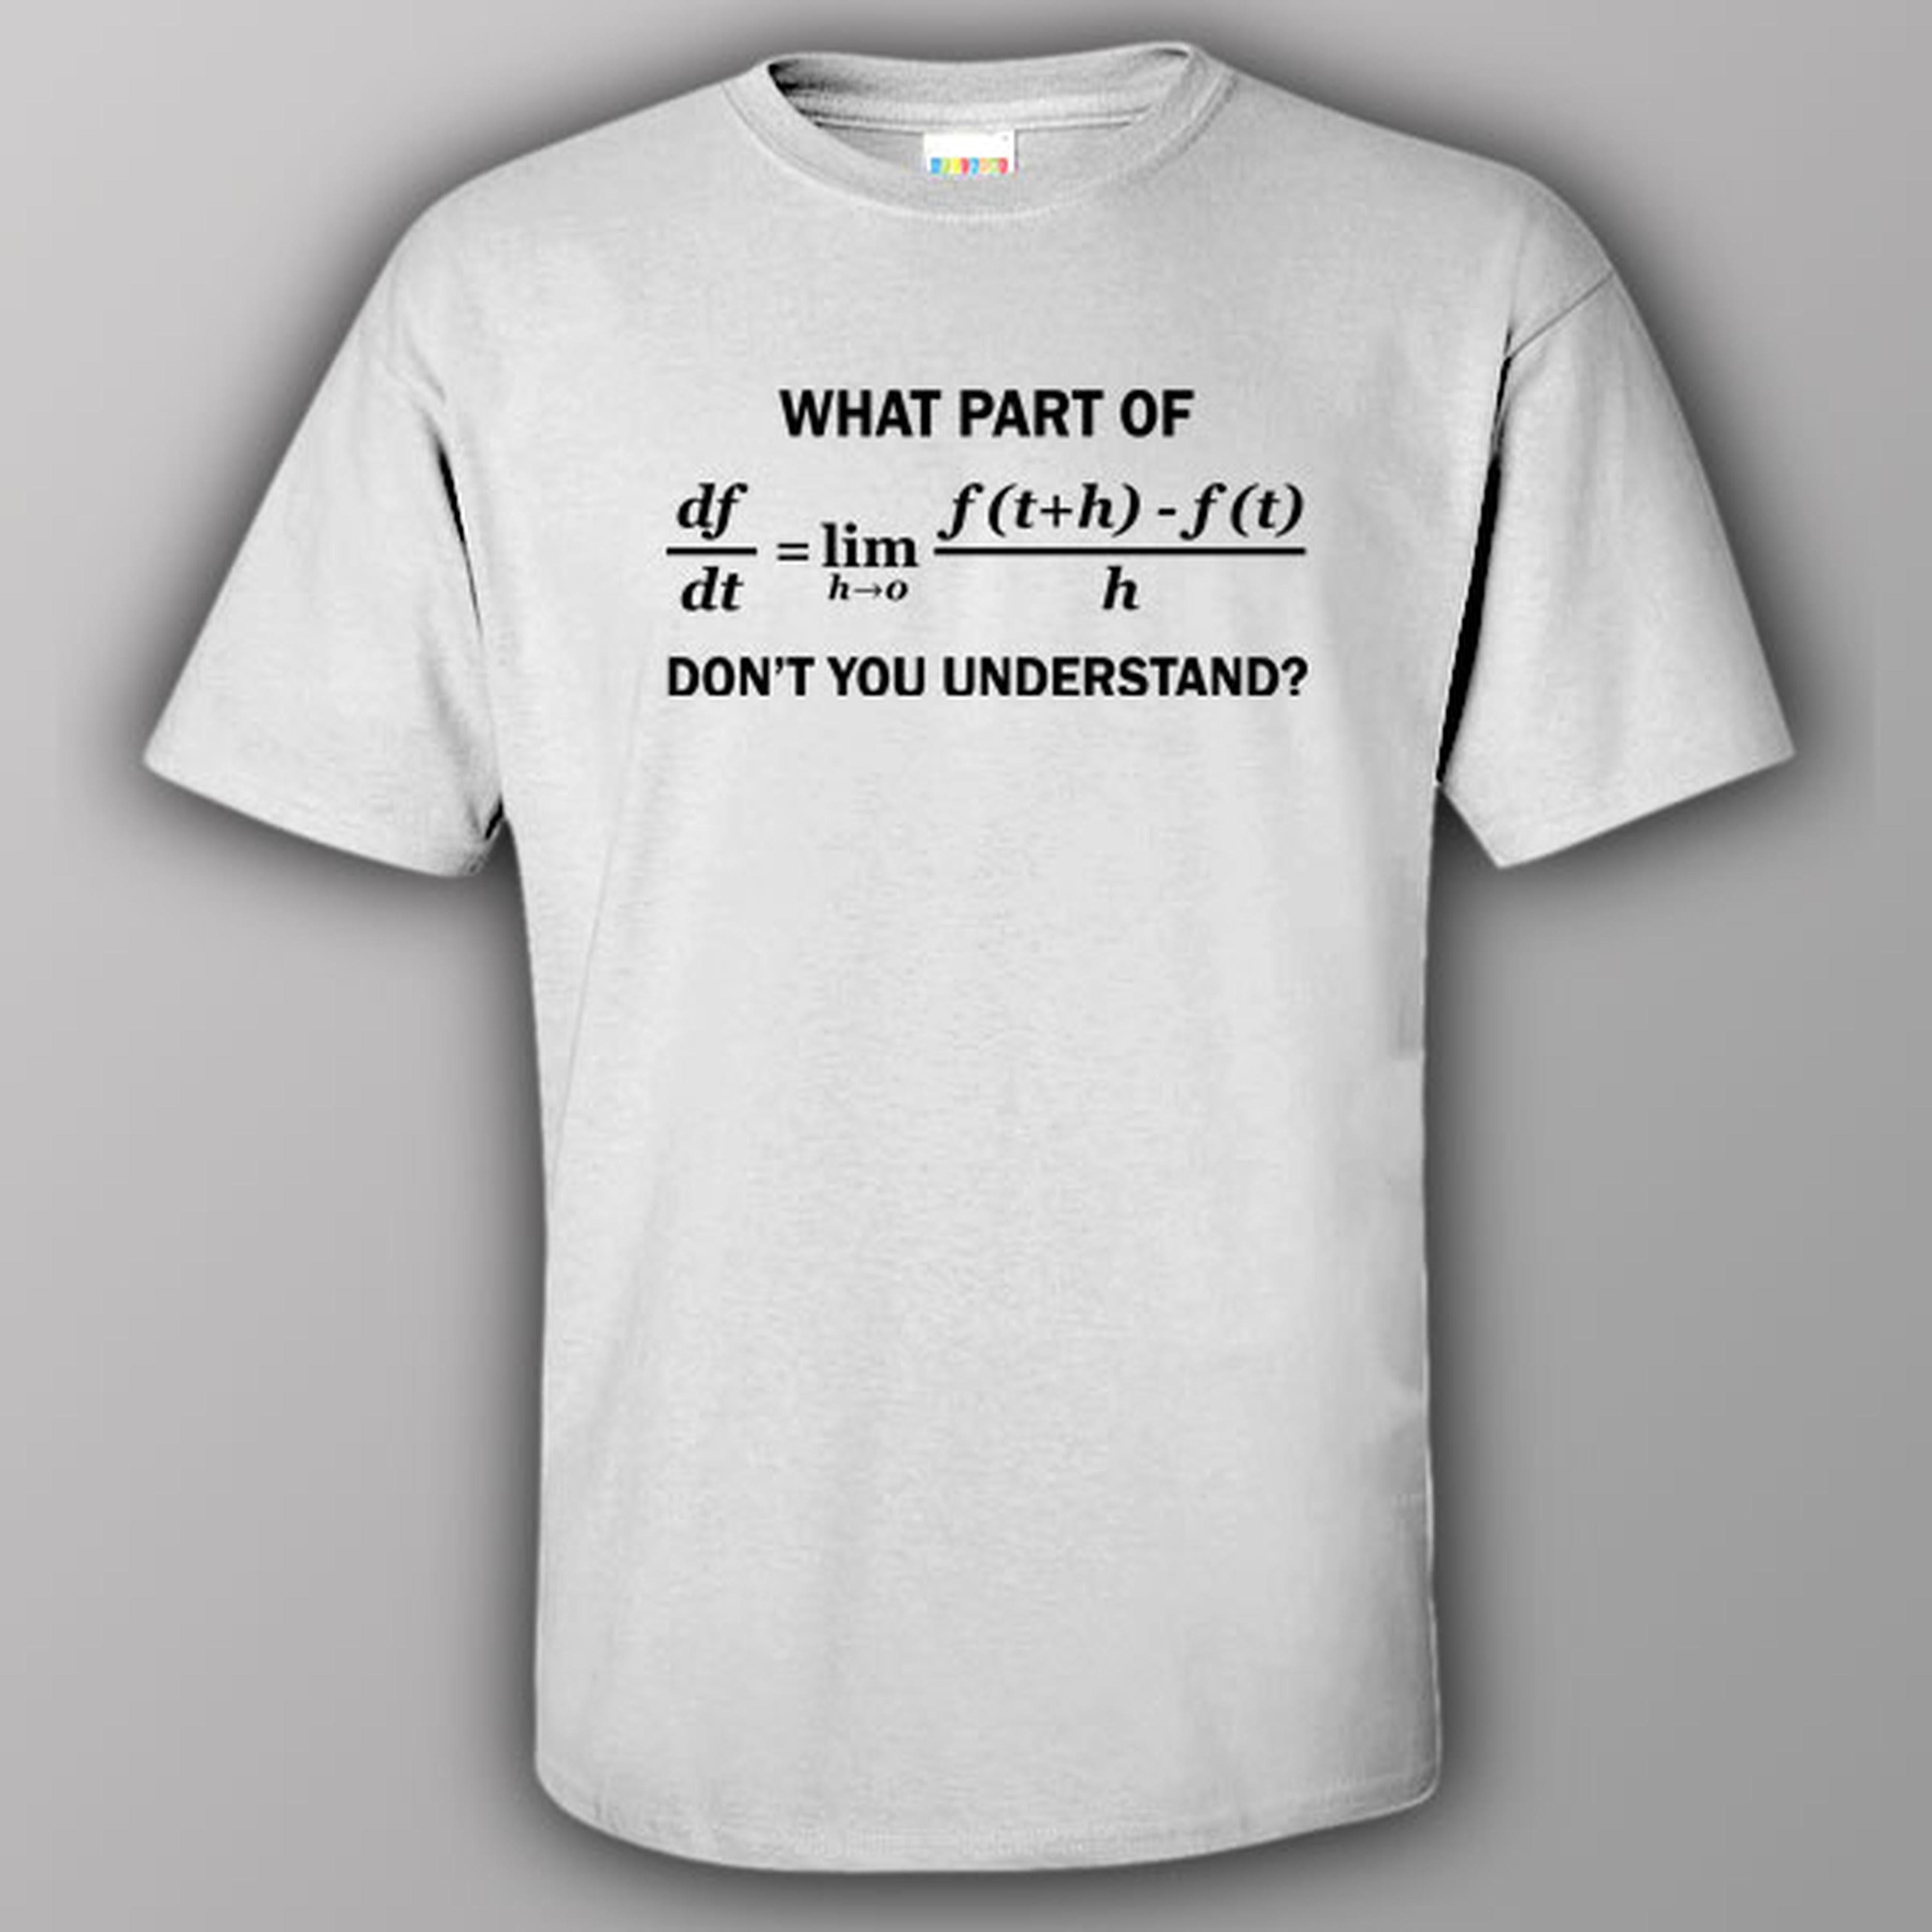 What part of formula don't you understand? - T-shirt